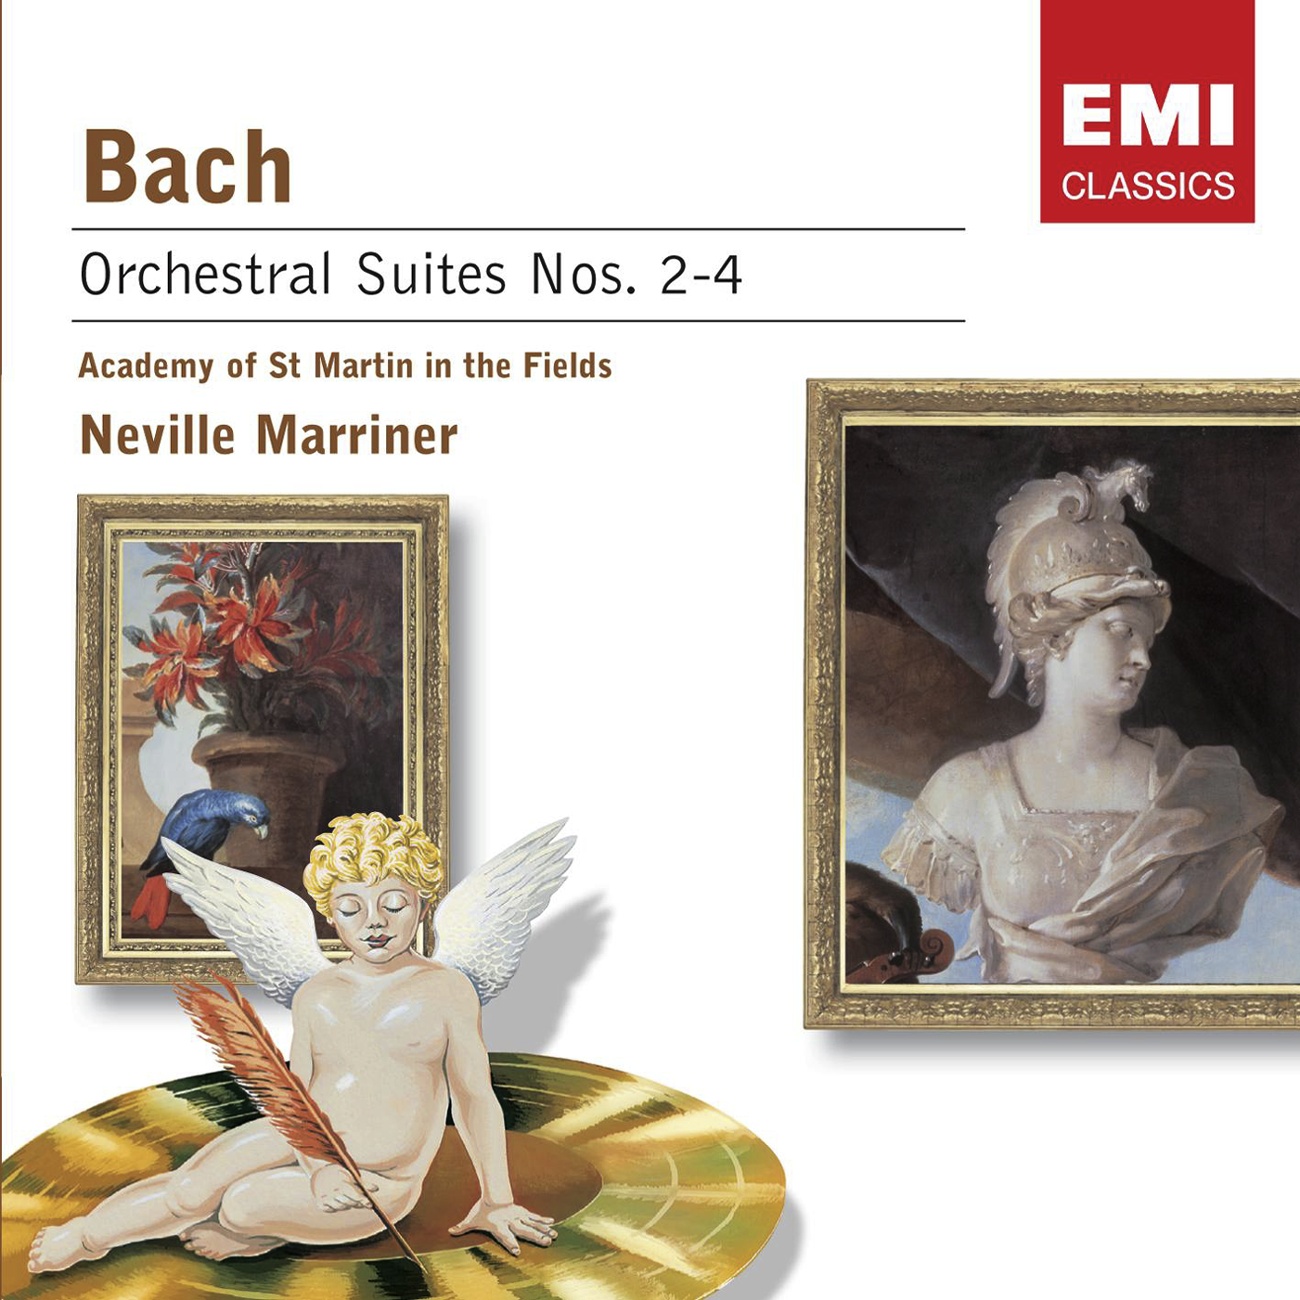 4 Orchestral Suites, BWV 10669, Suite No. 4 in D Major, BWV 1069 3 oboes, 3 trumpets, strings and timpani: Bourre es I  II